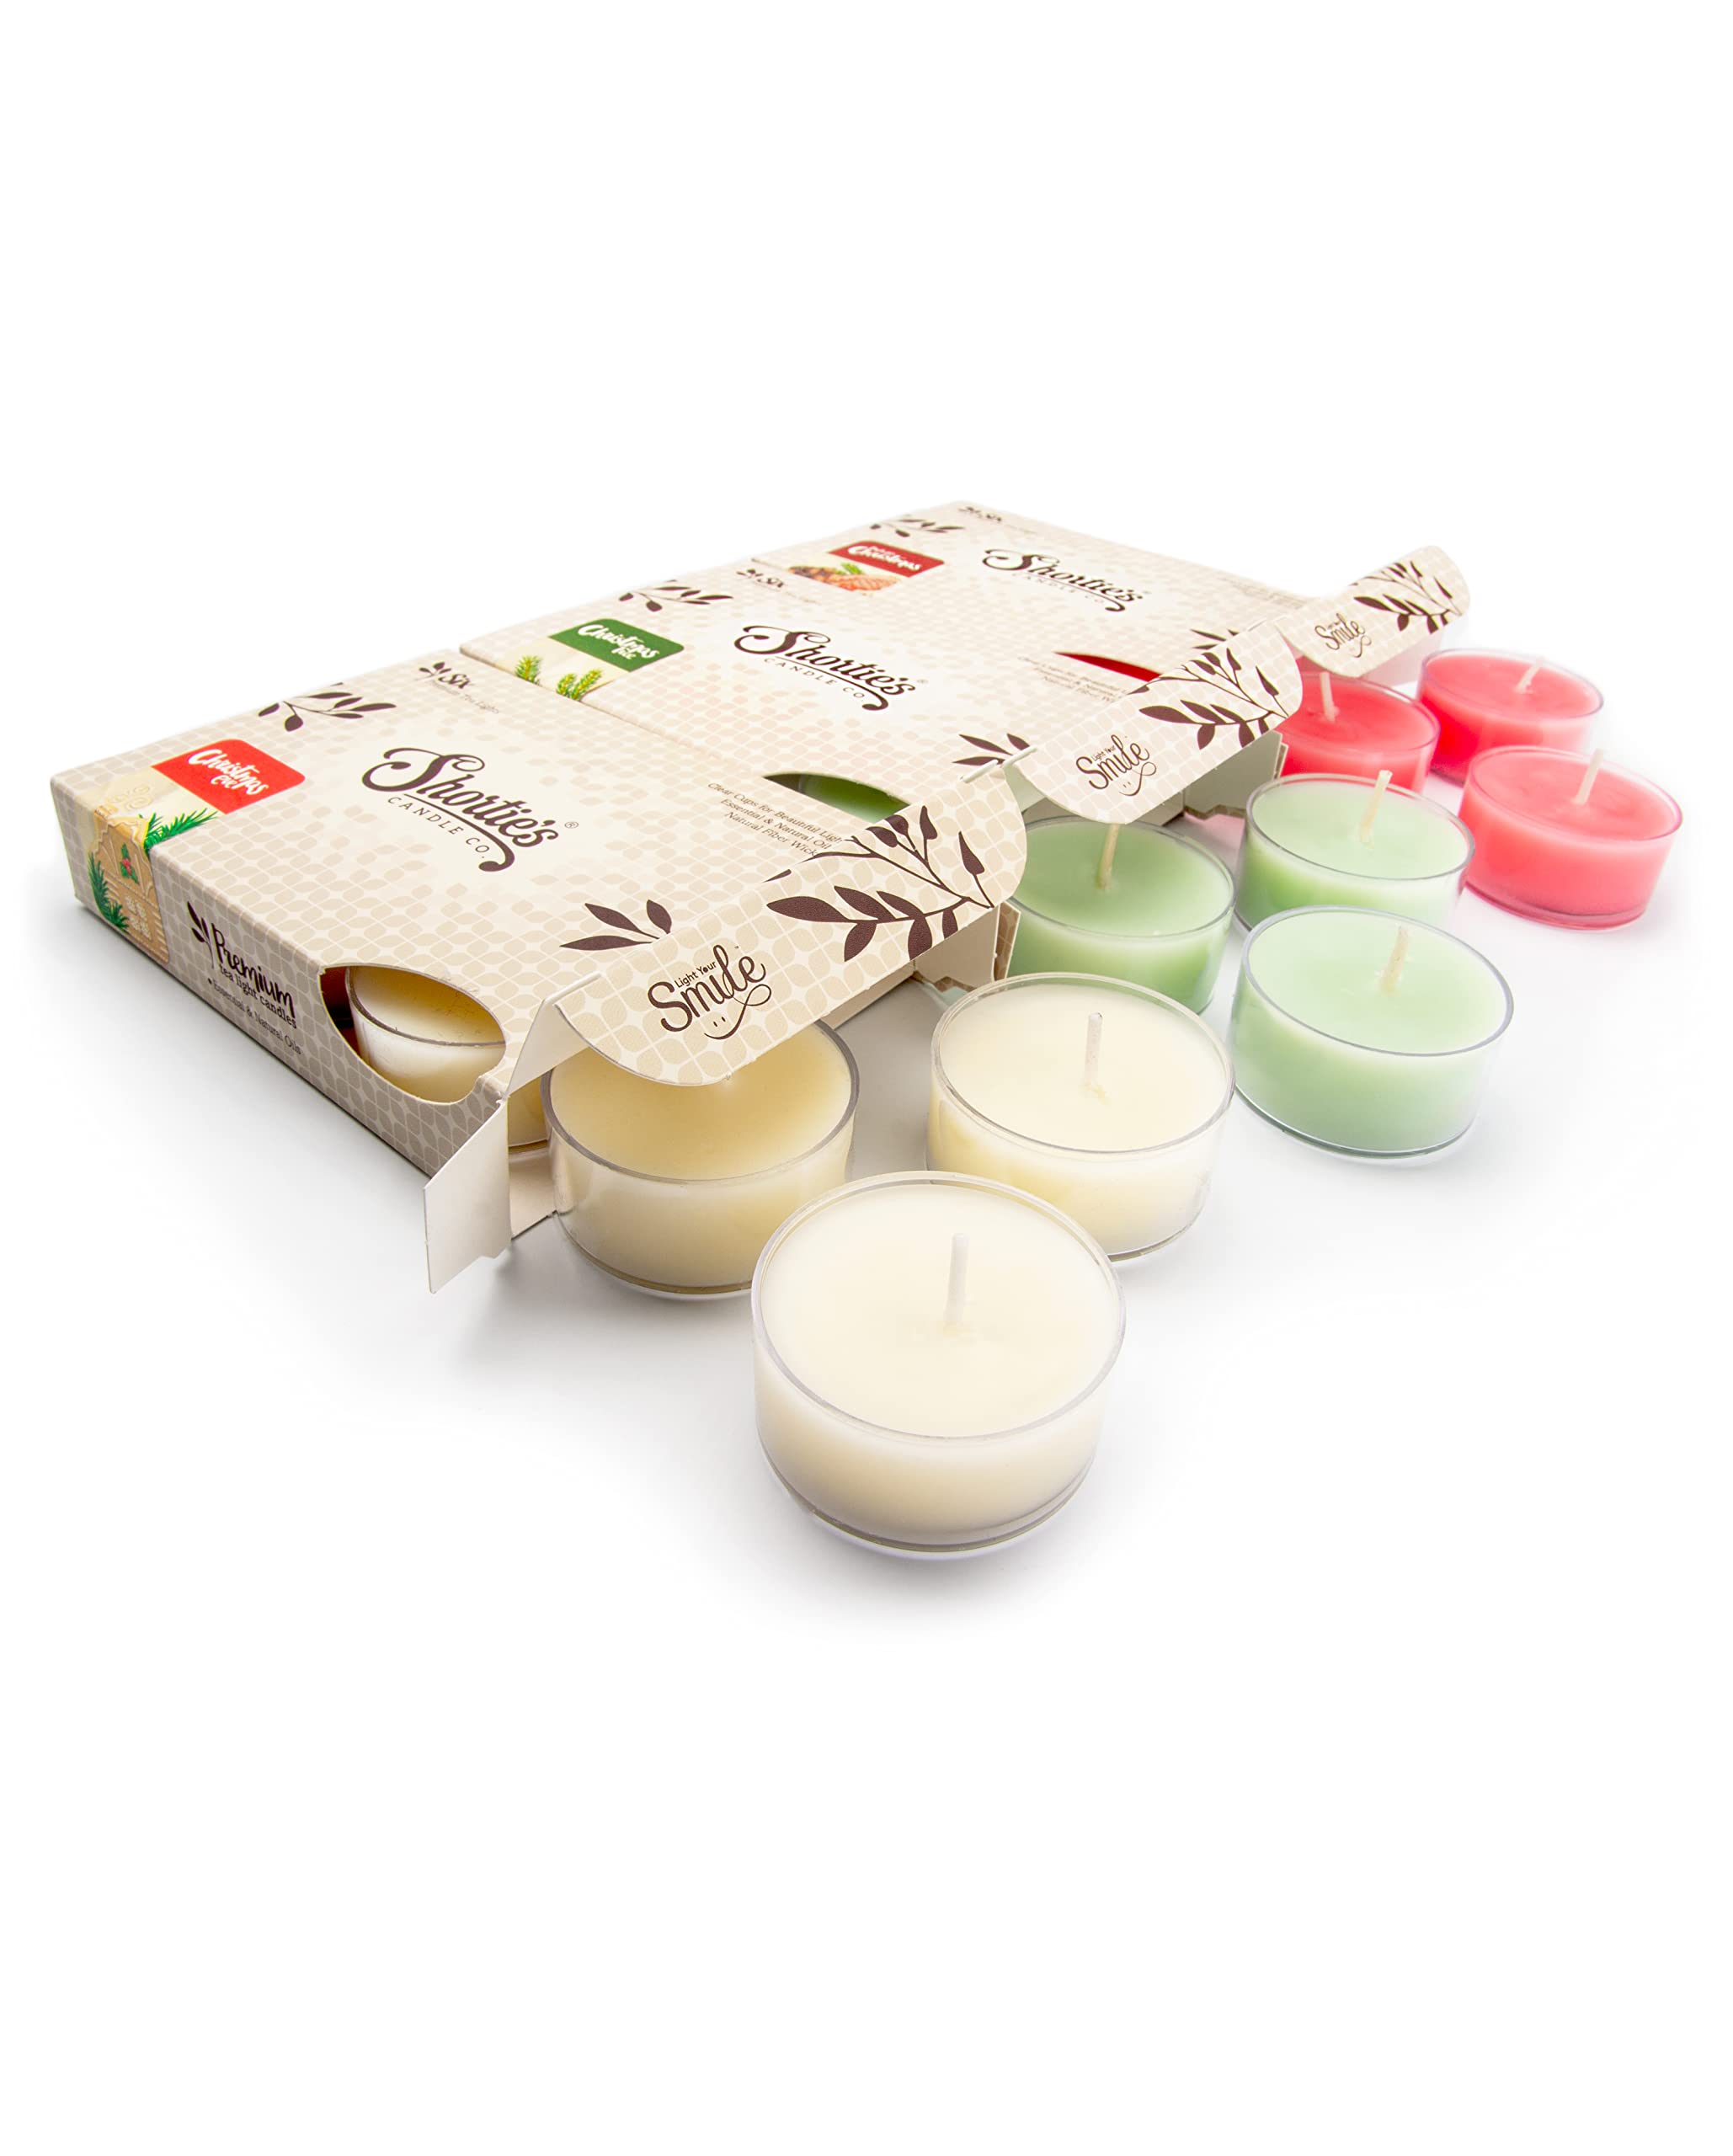 Shortie's Candle Company Christmas Premium Tealight Candles Variety 3 Pack (18 Highly Scented Tea Lights) - Dicken's Christmas, Christmas Tree, Christmas